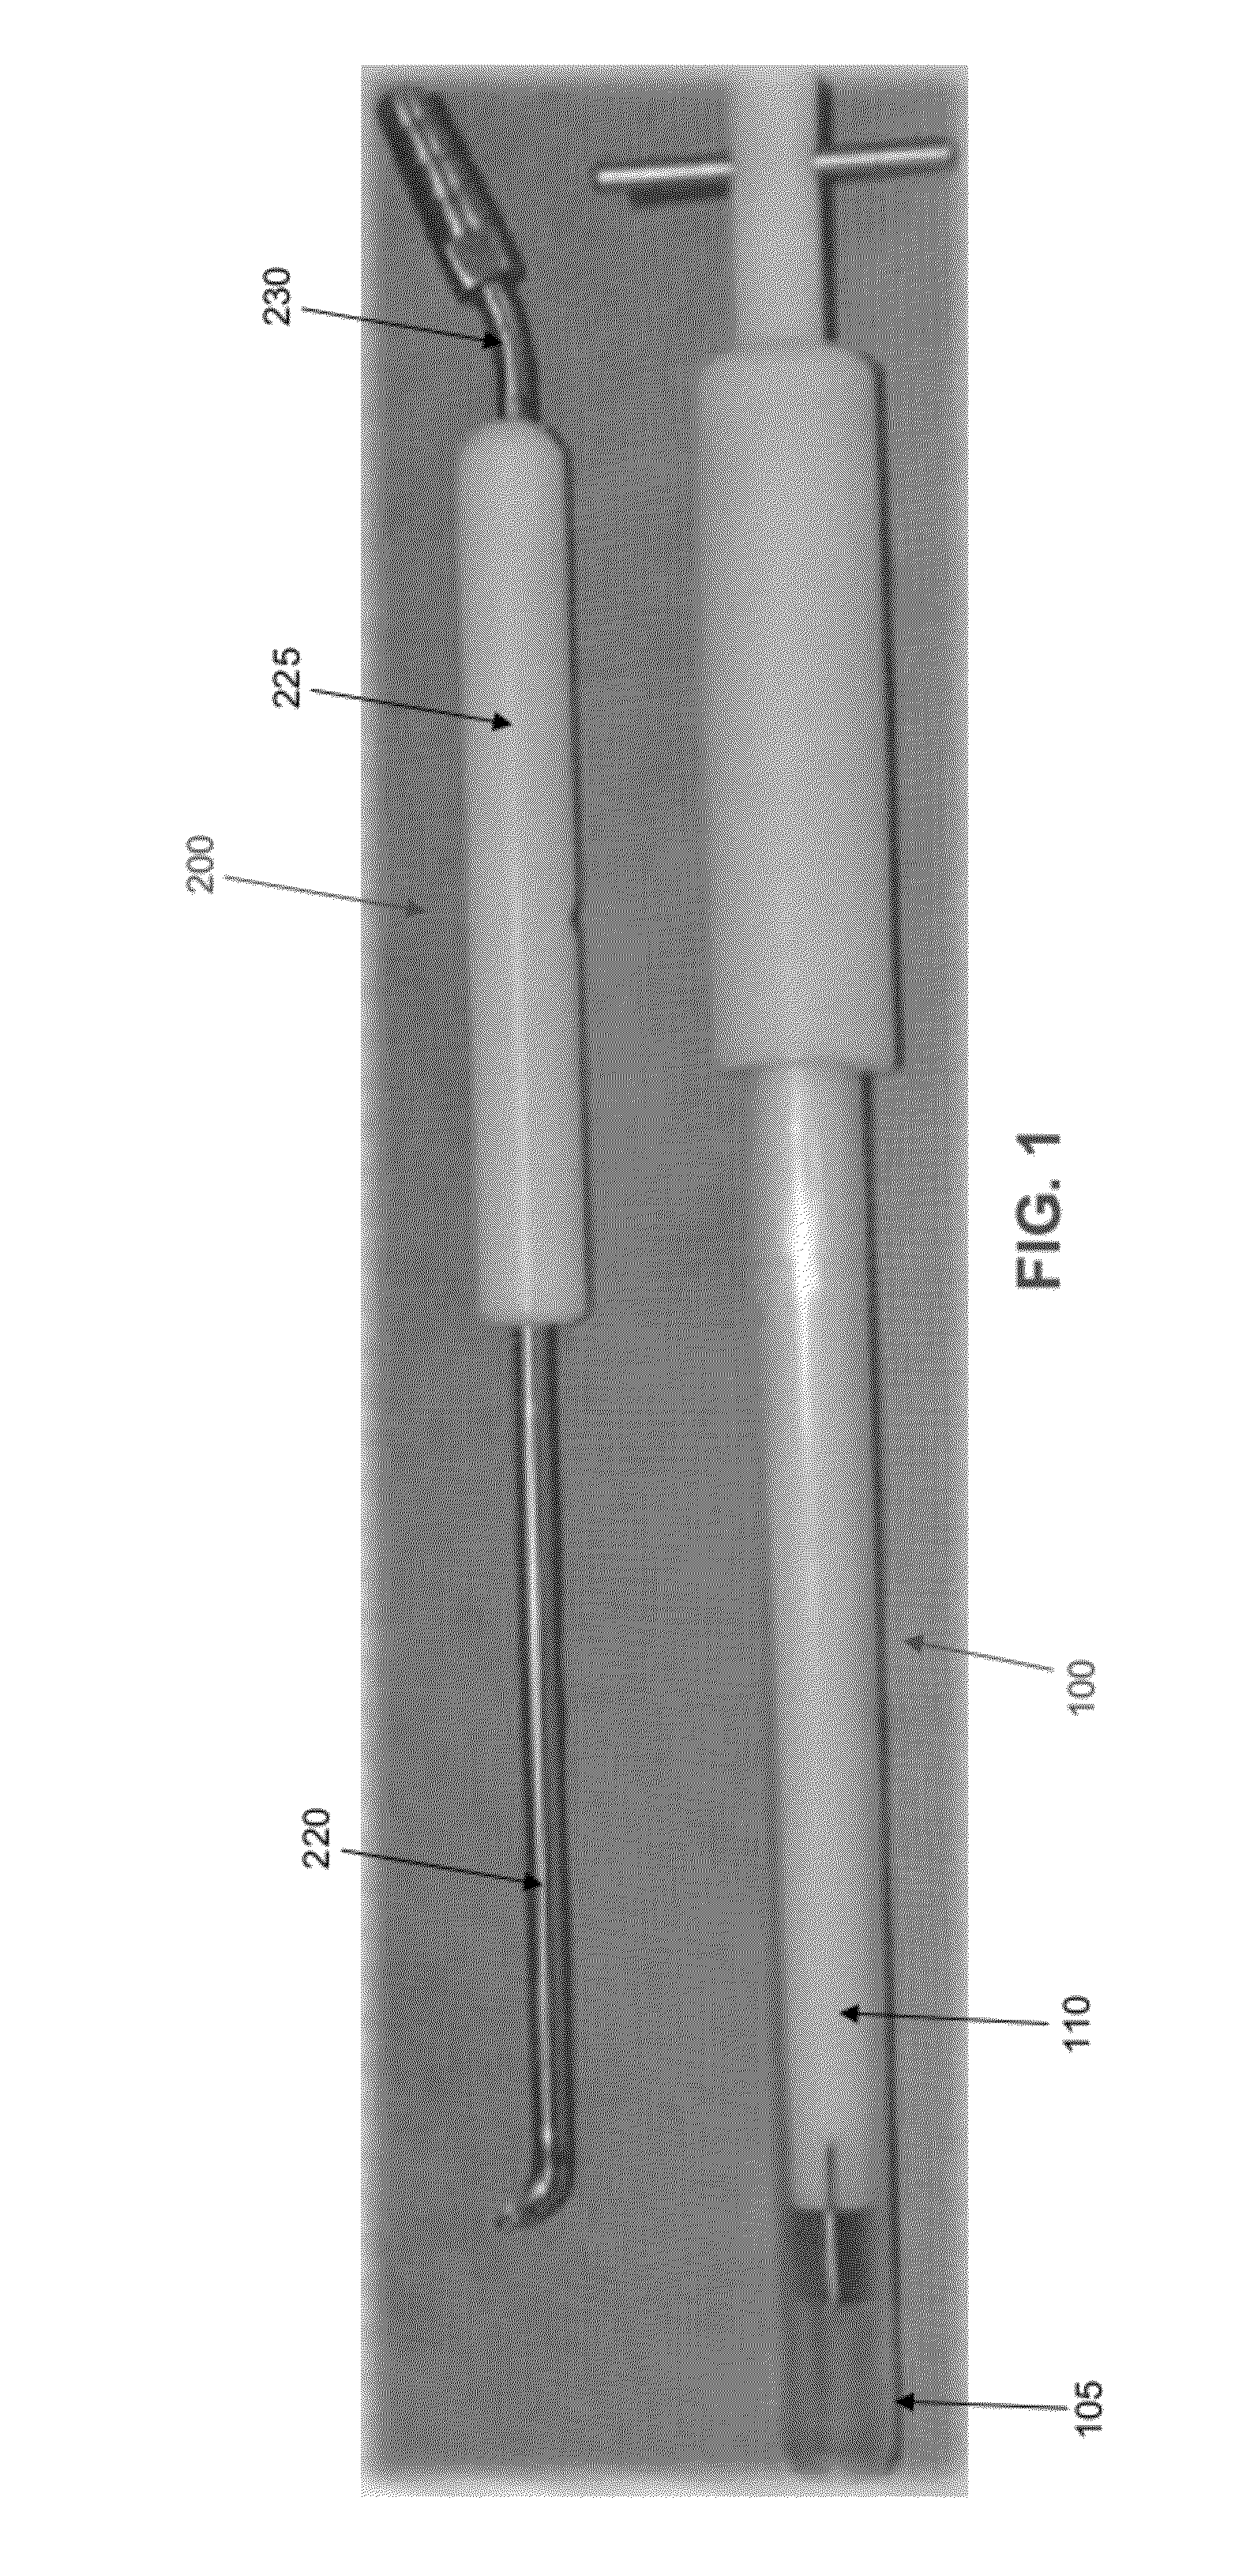 Method and apparatus for restoring articular cartilage